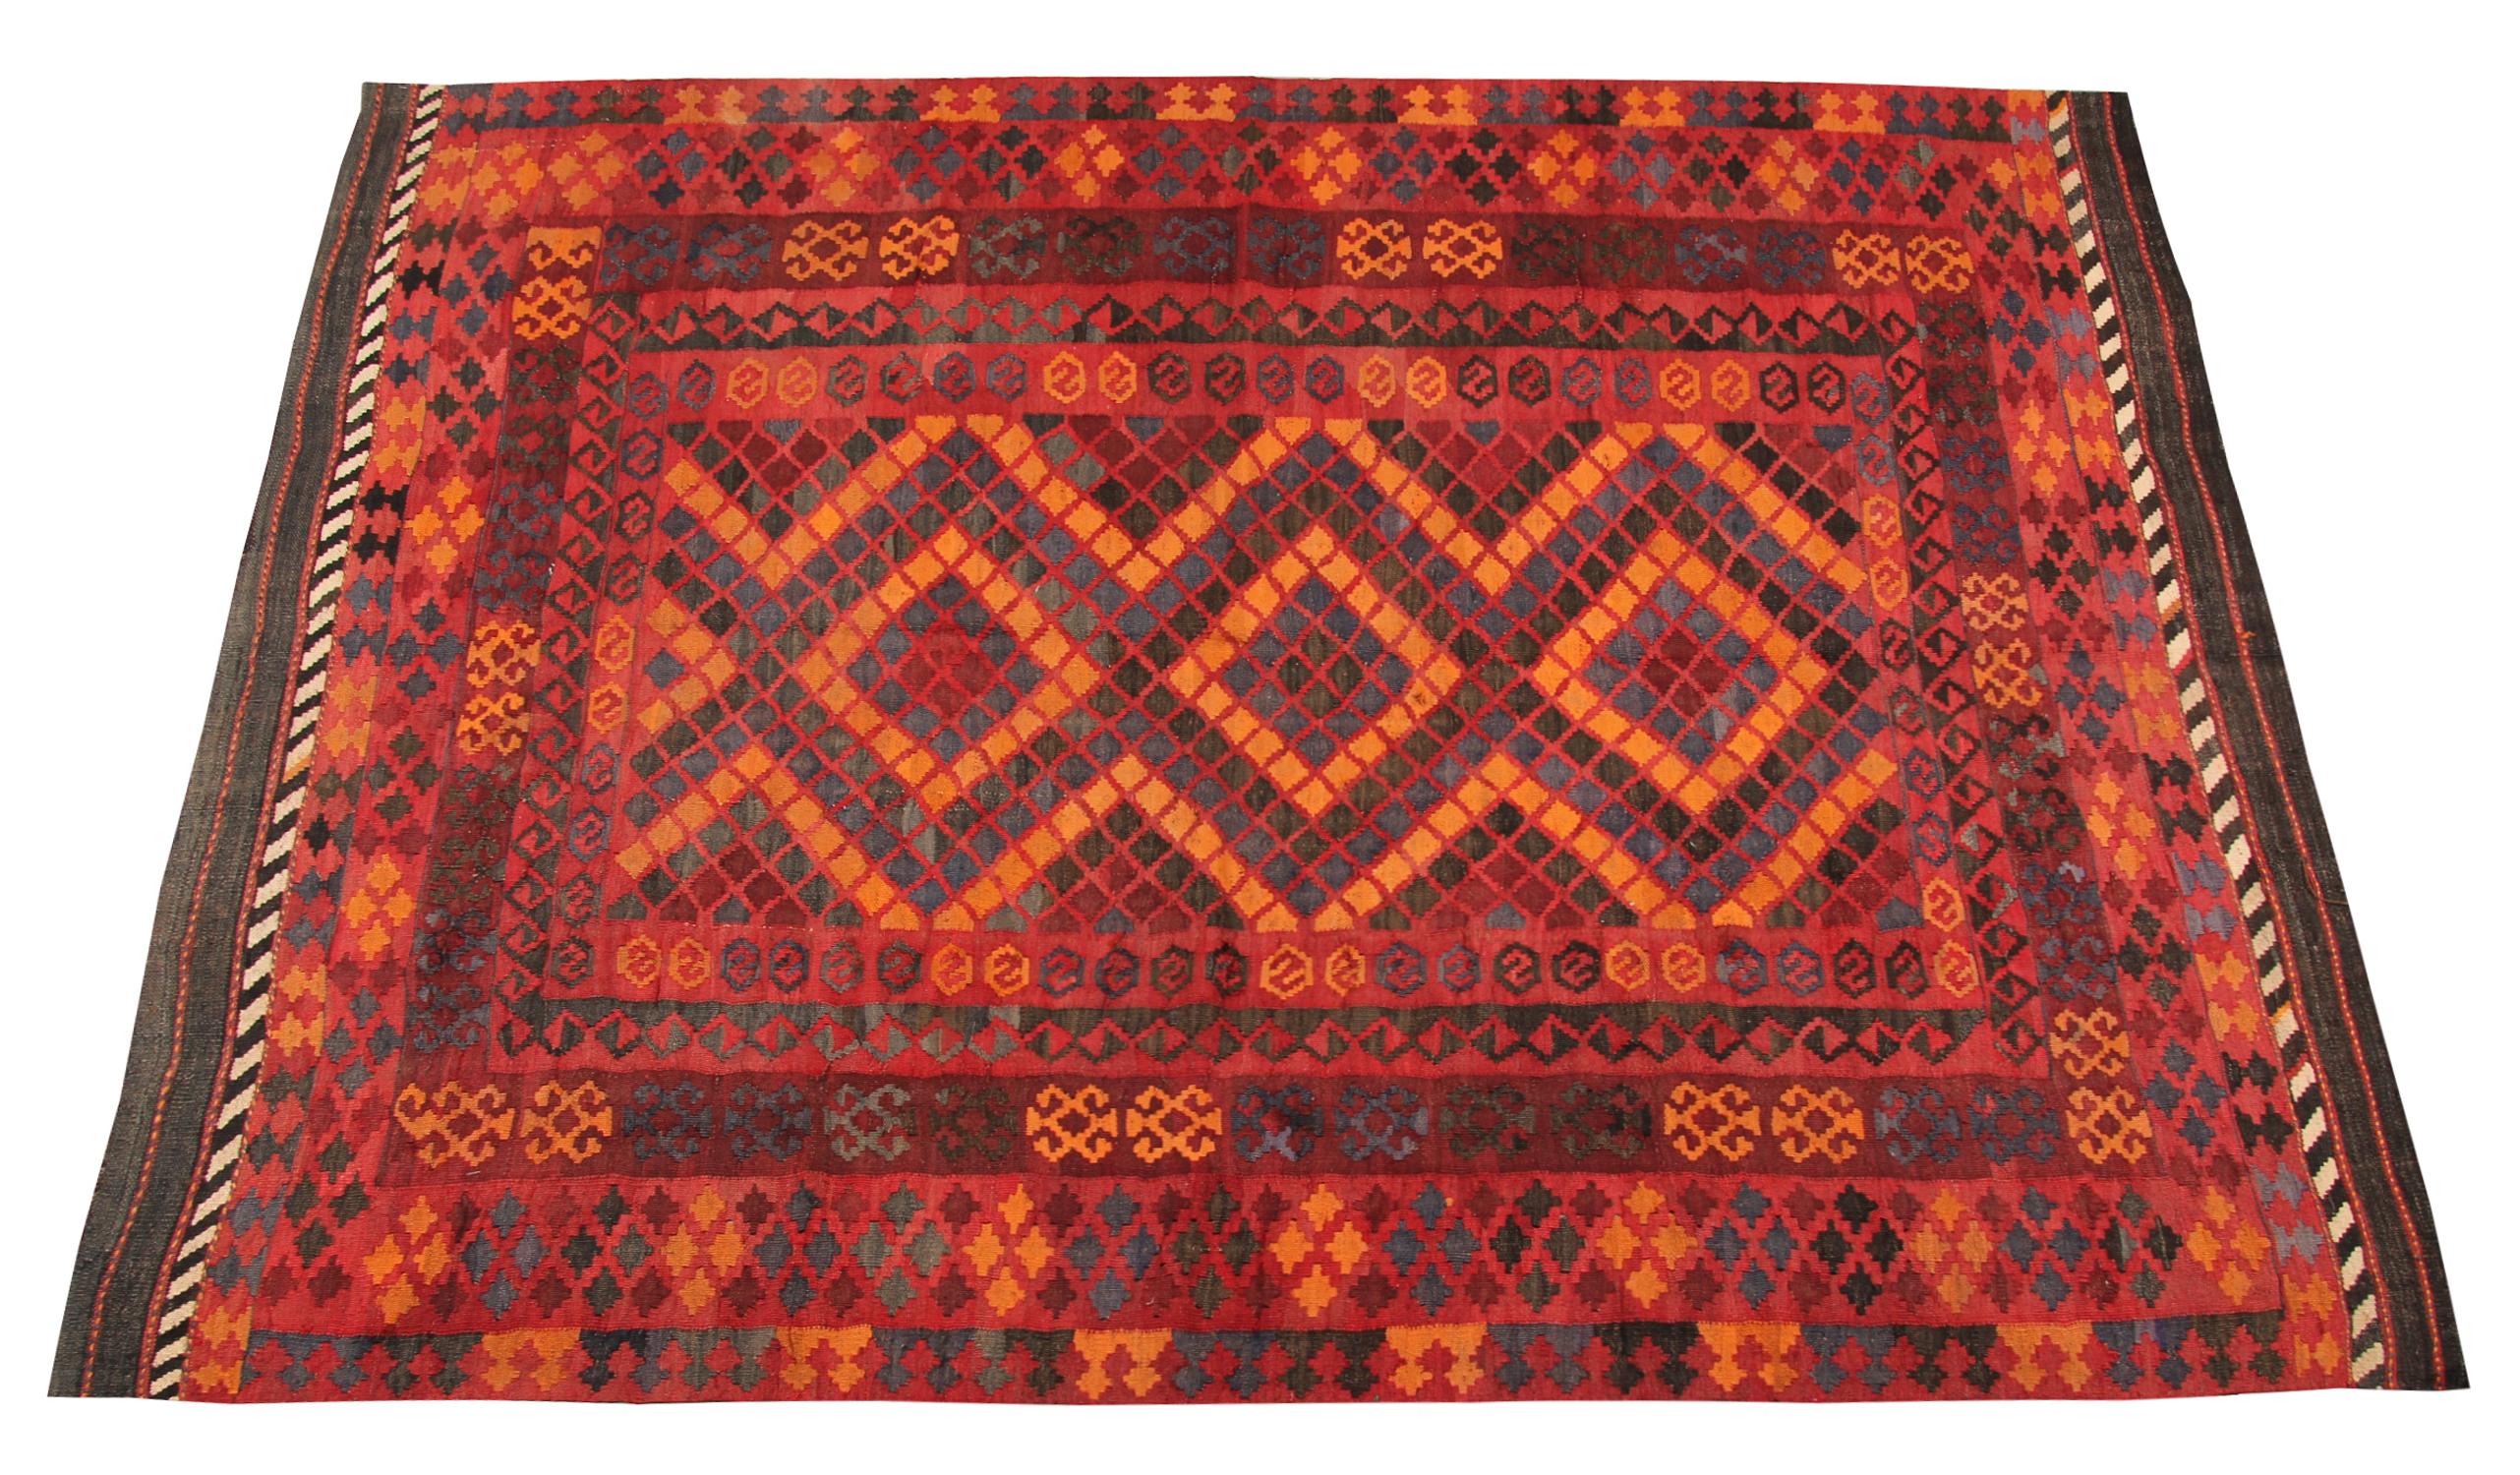 This orange-red rug is a Turkish carpet rug has woven by very skilled weavers in Turkey, who used the highest quality wool and cotton. The flat-weave rug has dark and light red, blue and dark brown colors. The red and blue background of this